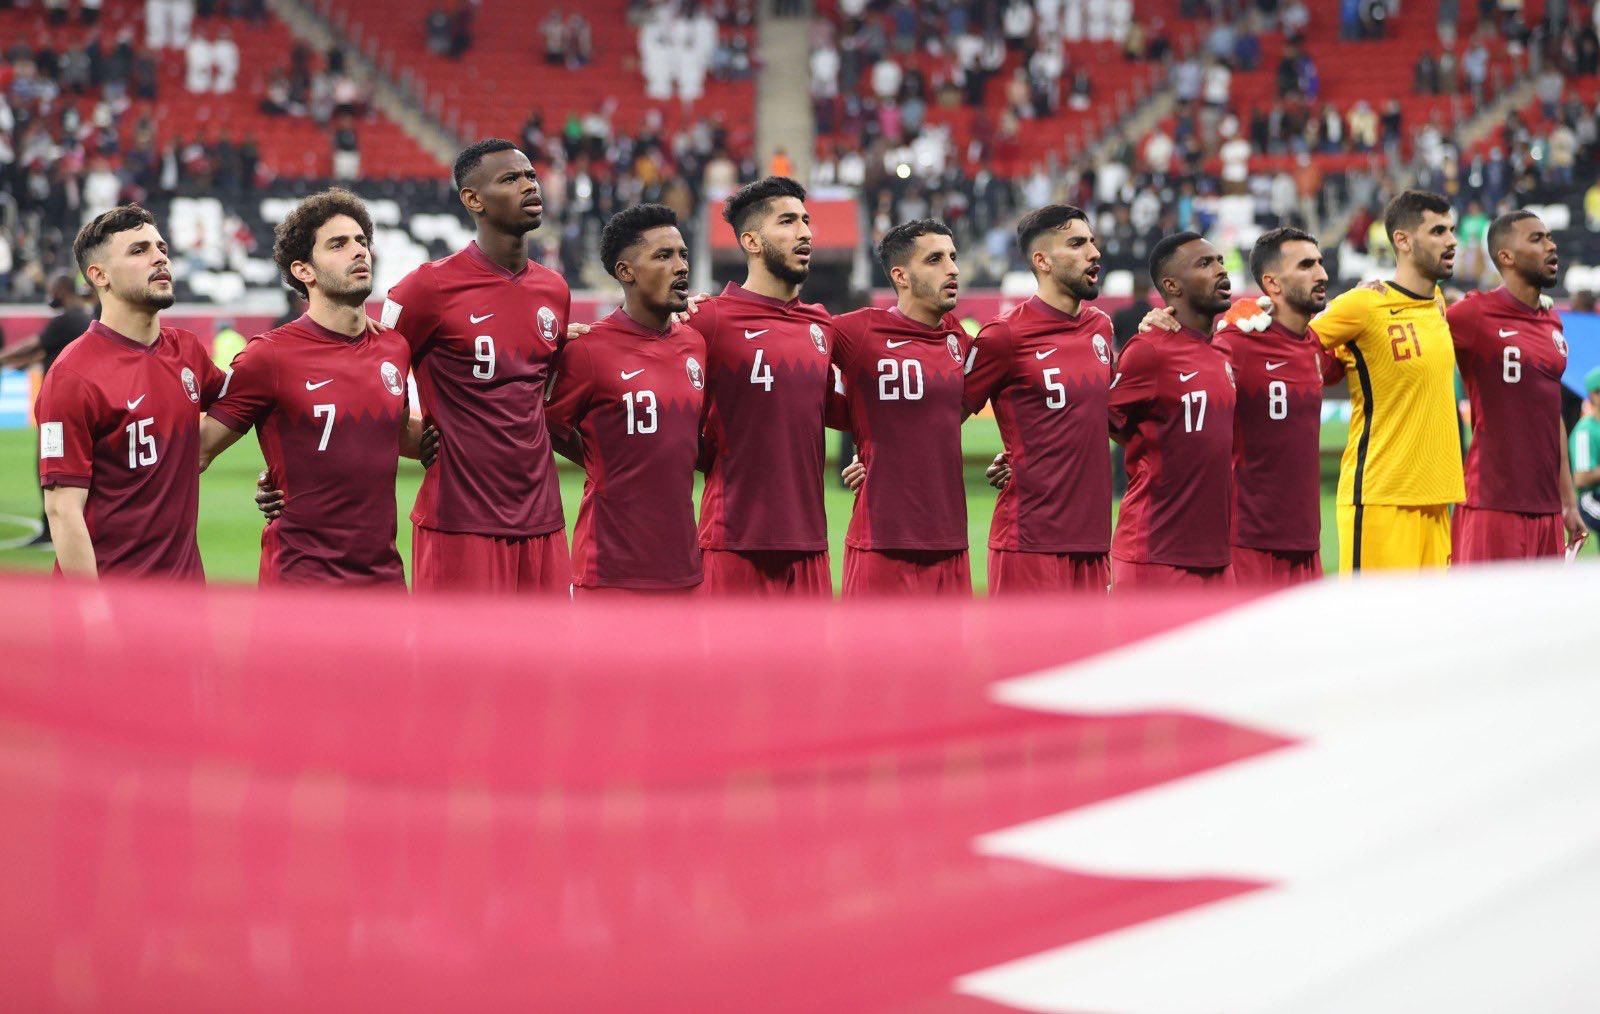 Qatar to Face Algeria in an Exciting Football Confrontation